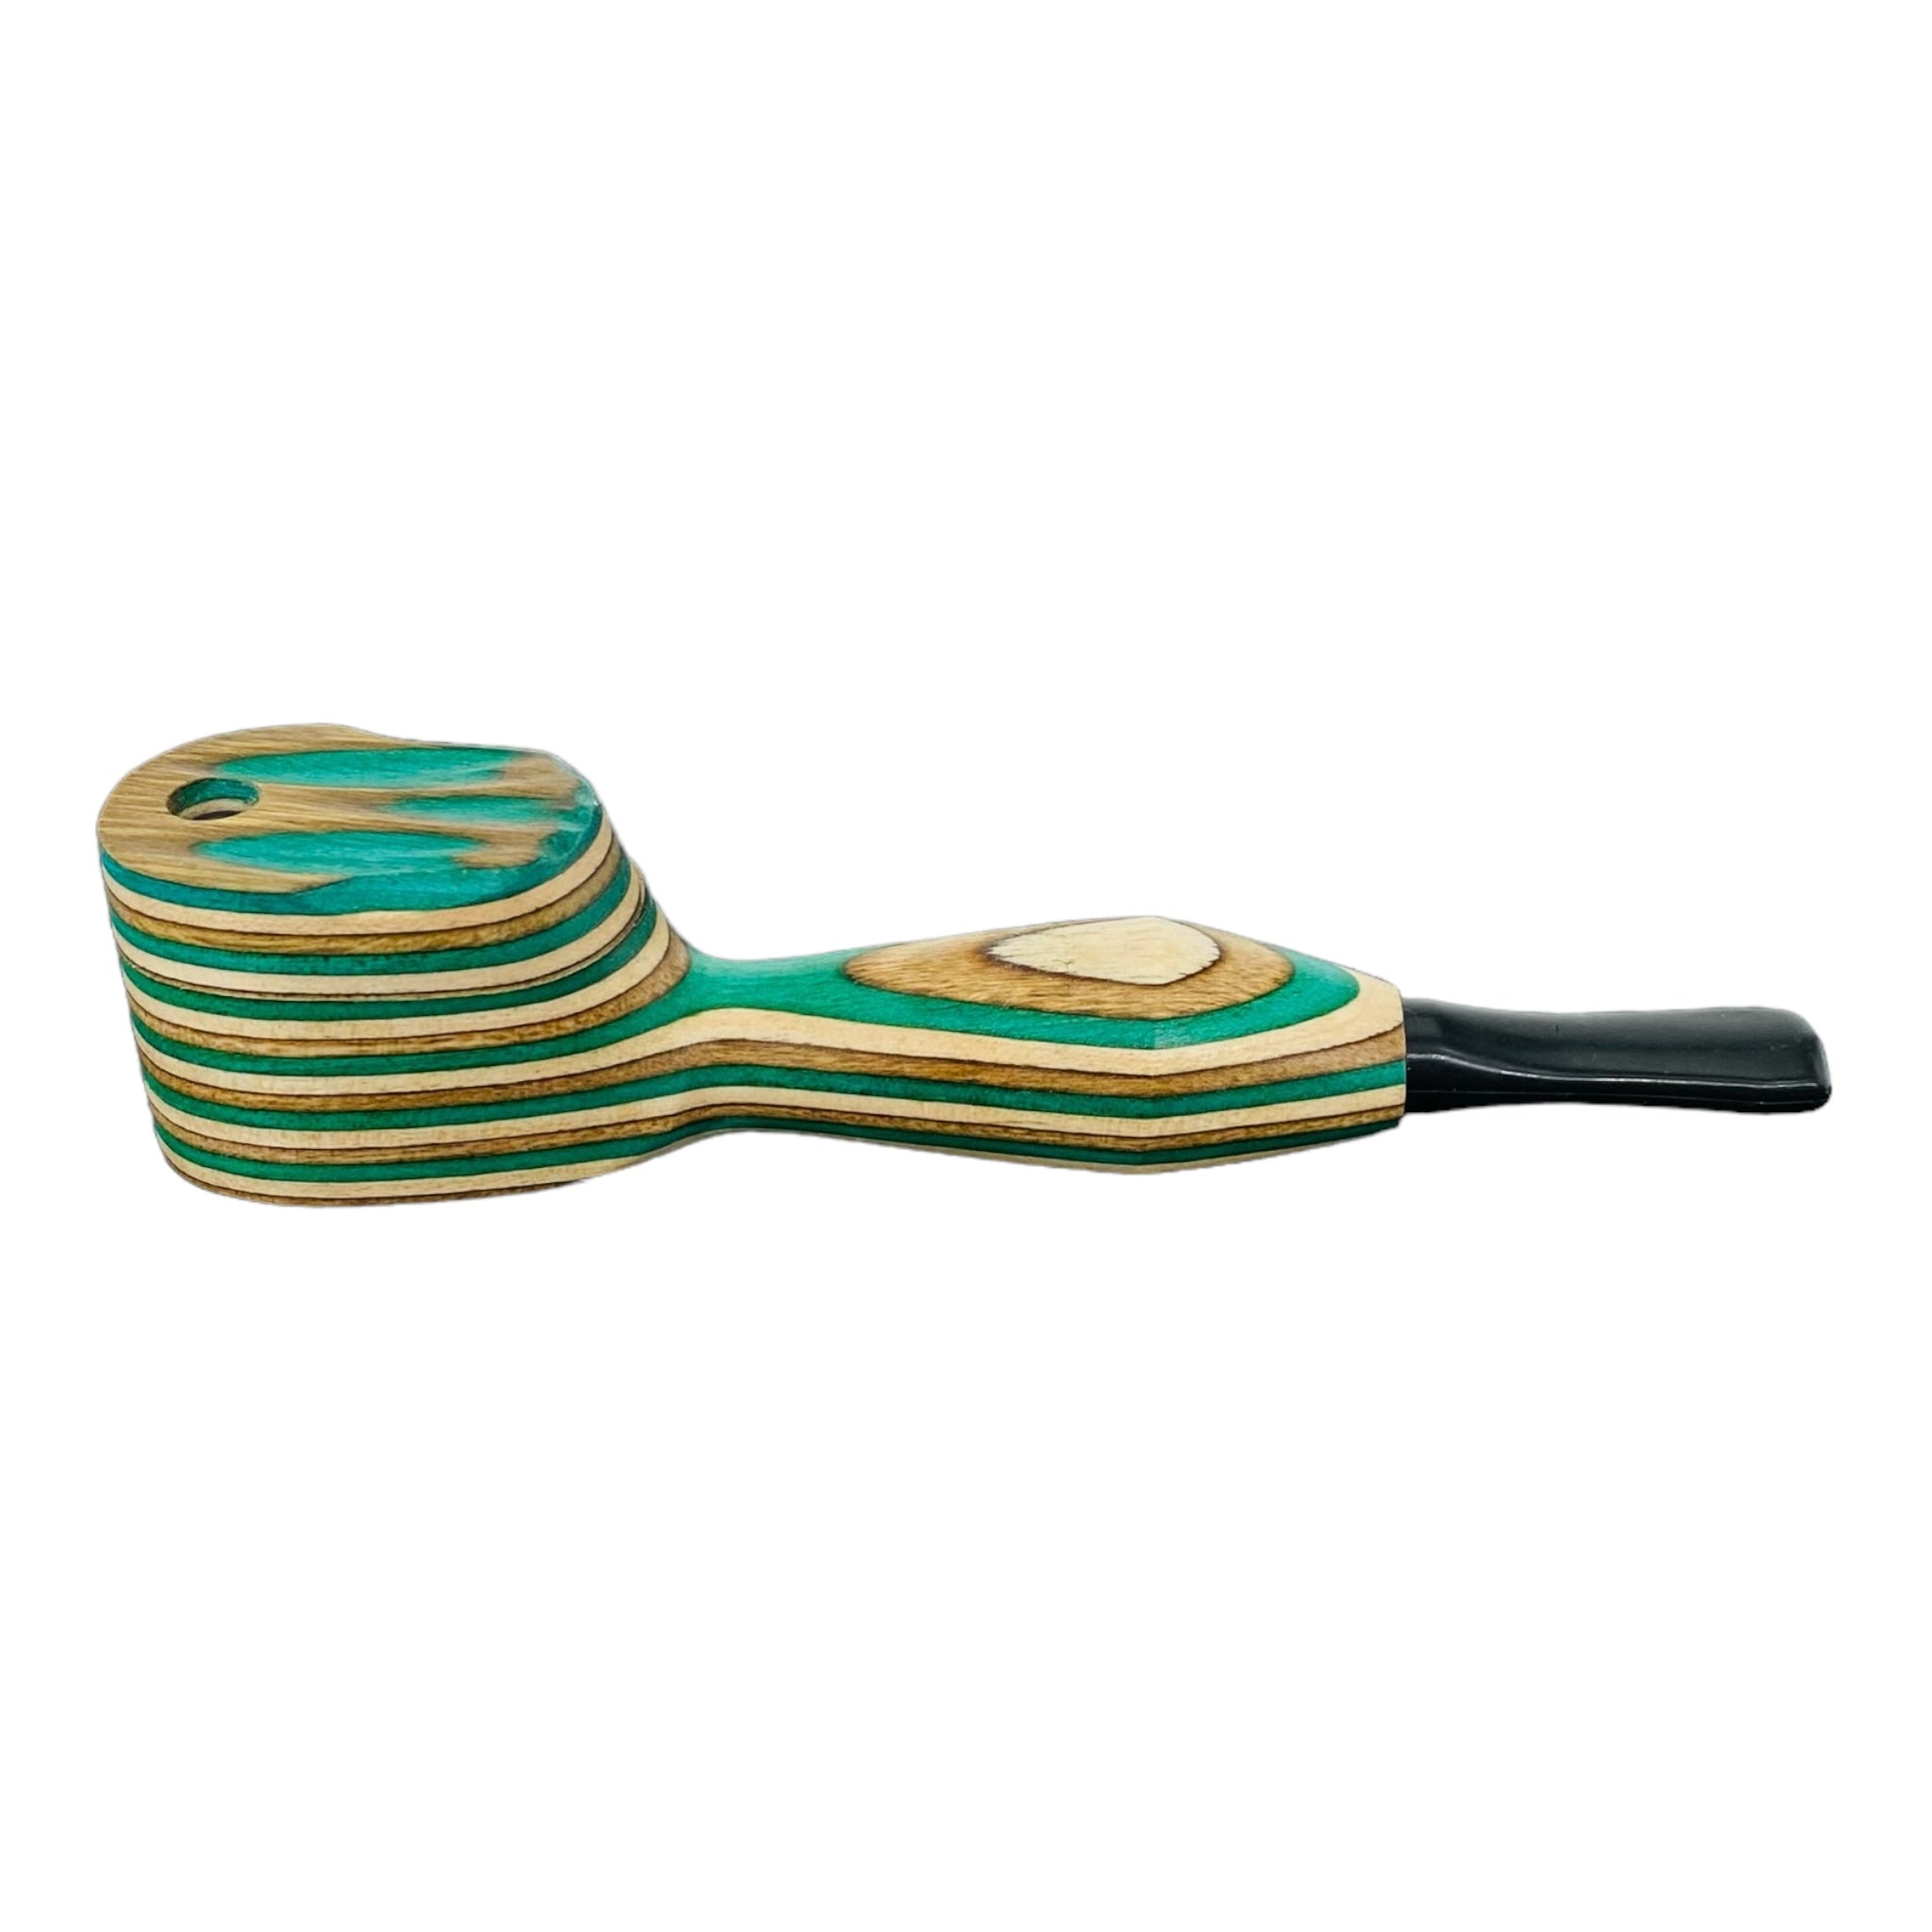 Wood Hand Pipe - Multi Colored Wood Pipe With Plastic Mouthpiece